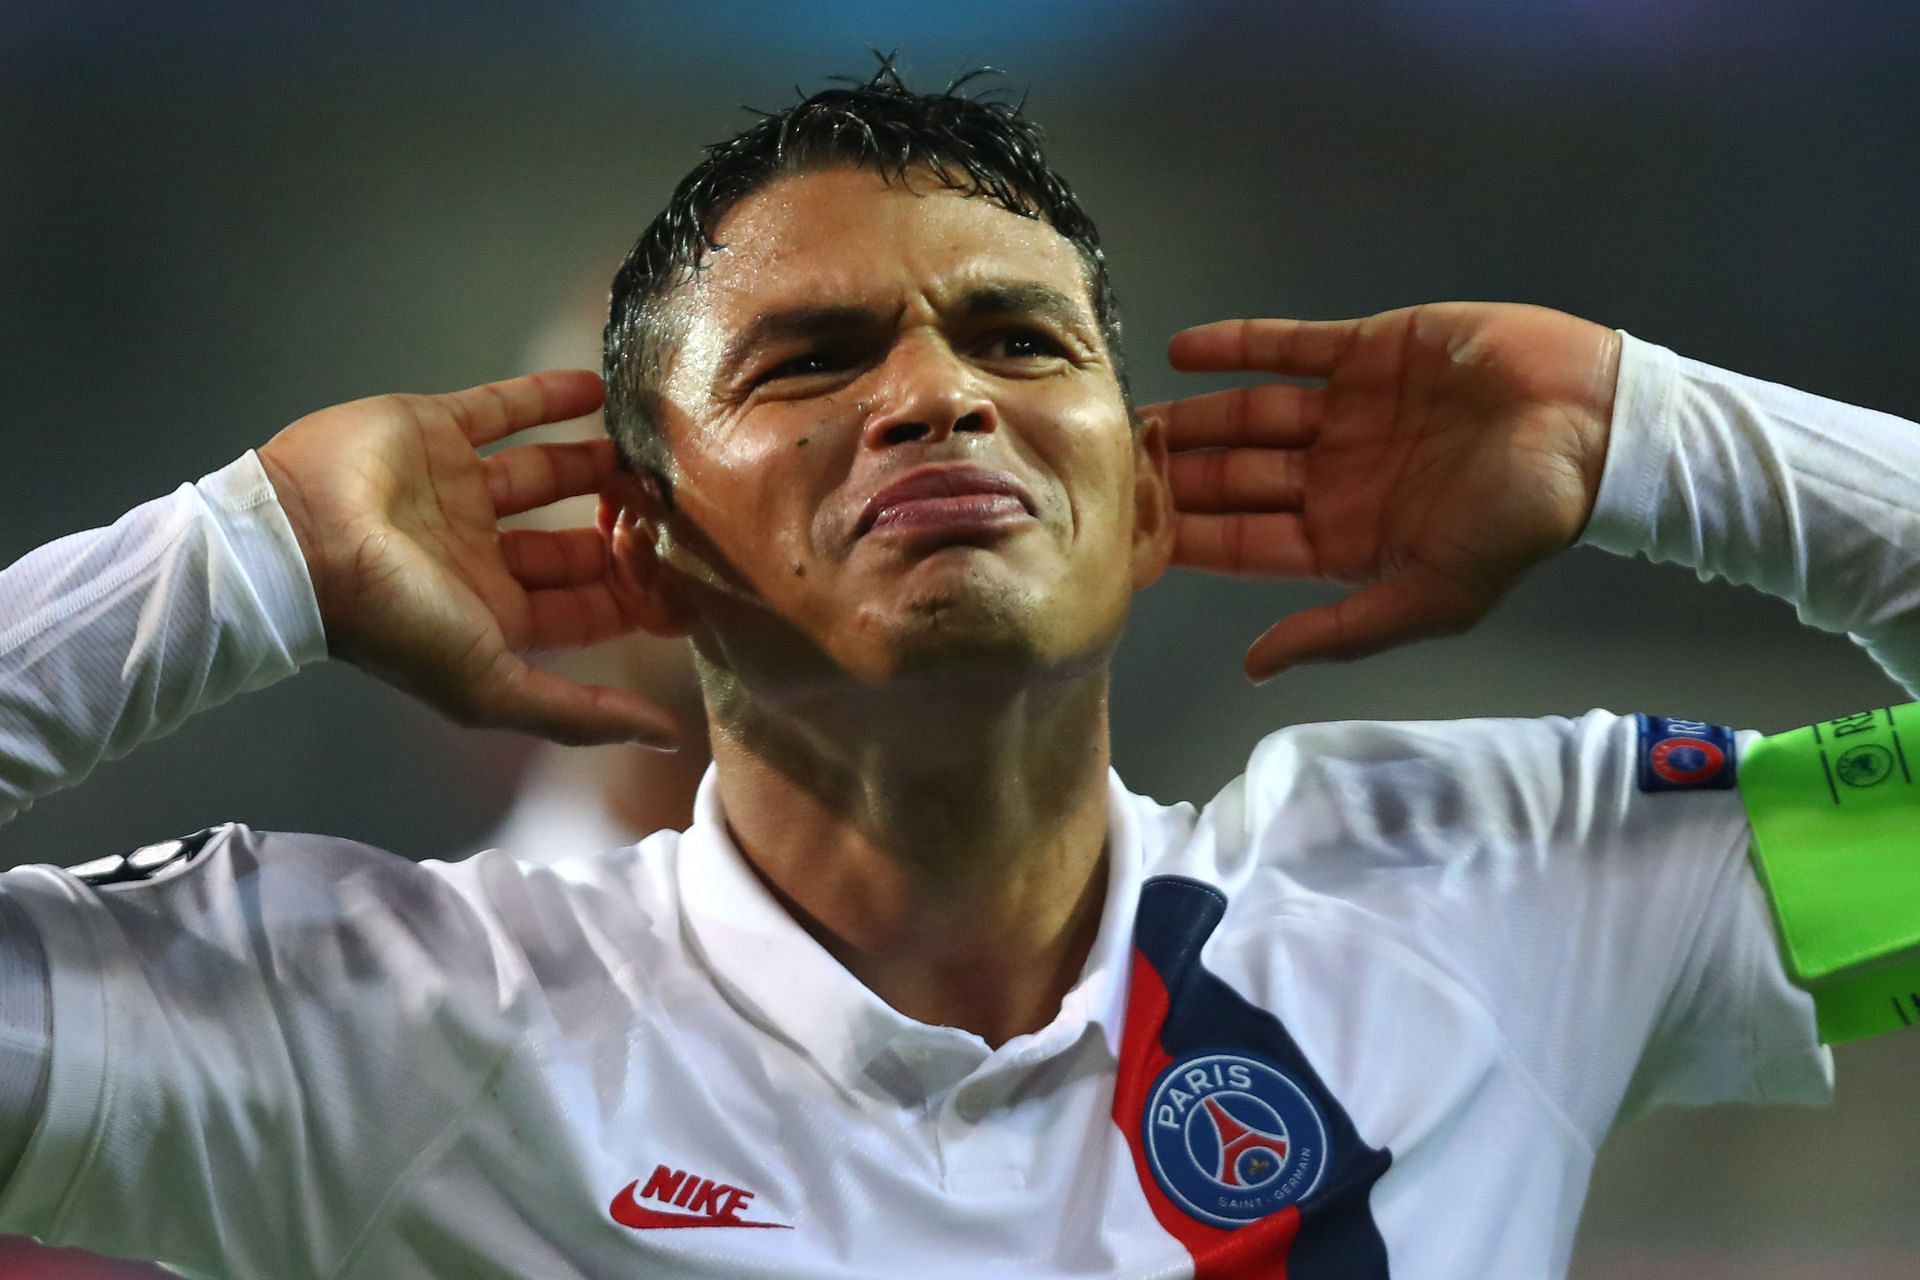 Thiago Silva captained PSG to several trophies